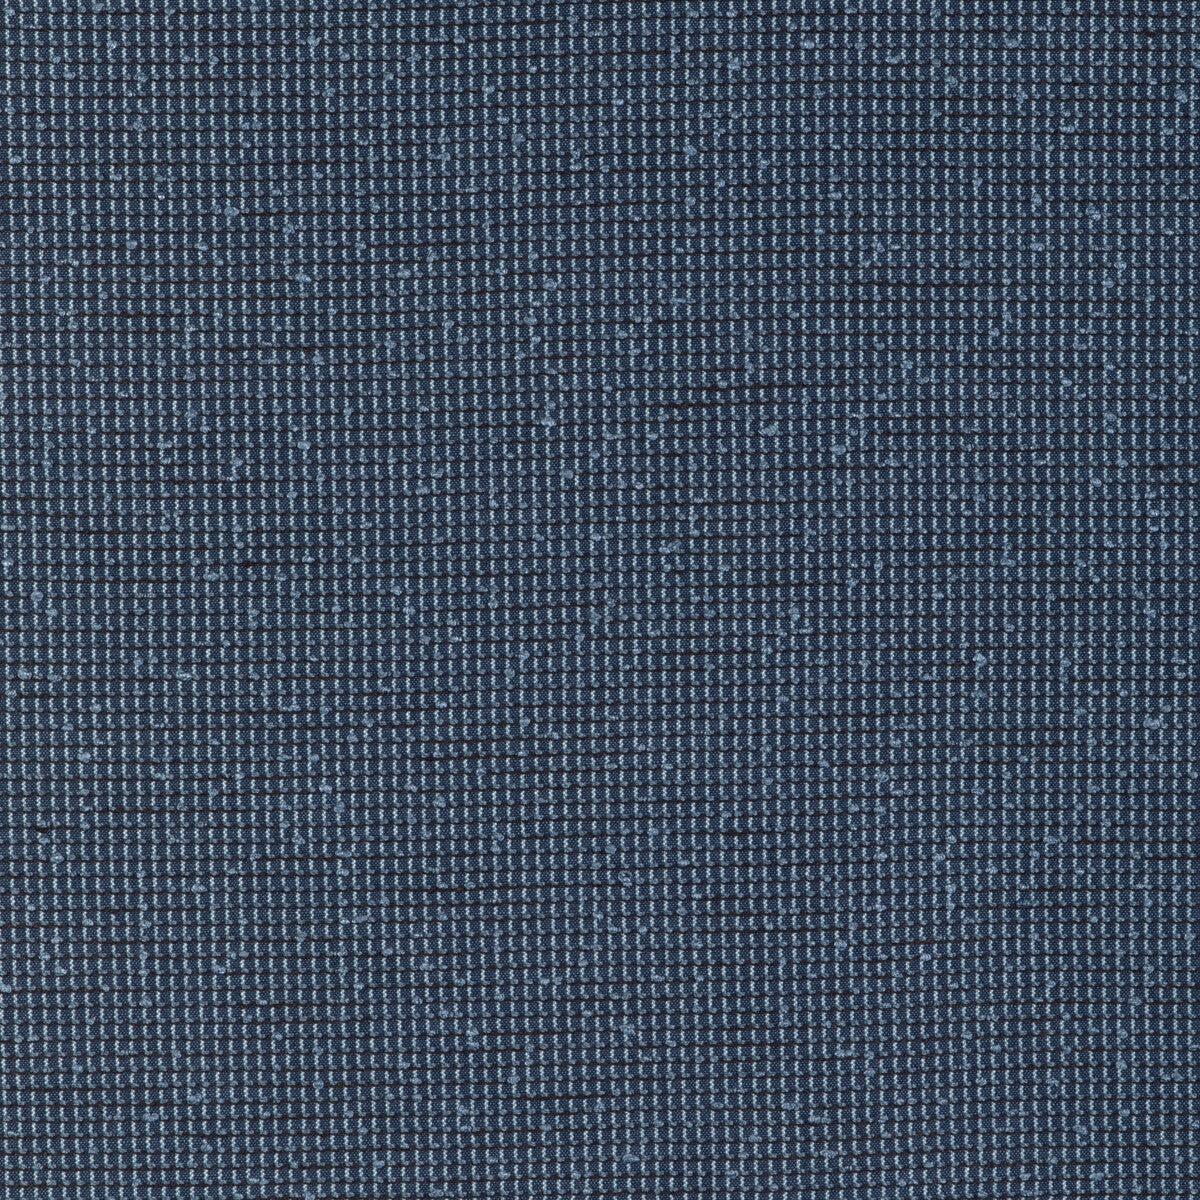 Mado fabric in indigo color - pattern GWF-3798.850.0 - by Lee Jofa Modern in the Kelly Wearstler VIII collection